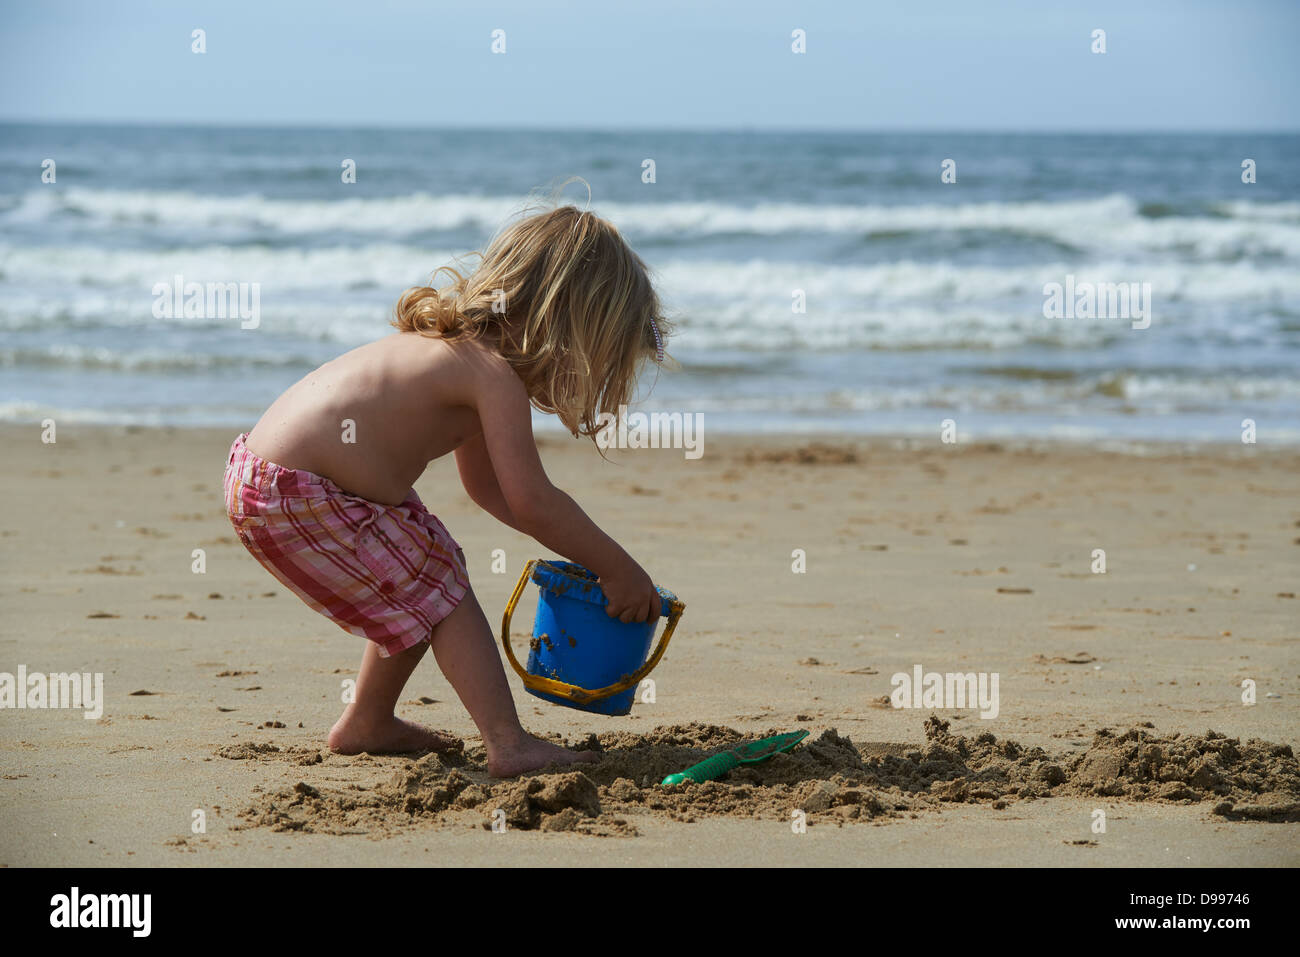 Tout-petit enfant blond girl playing in sand on beach Banque D'Images